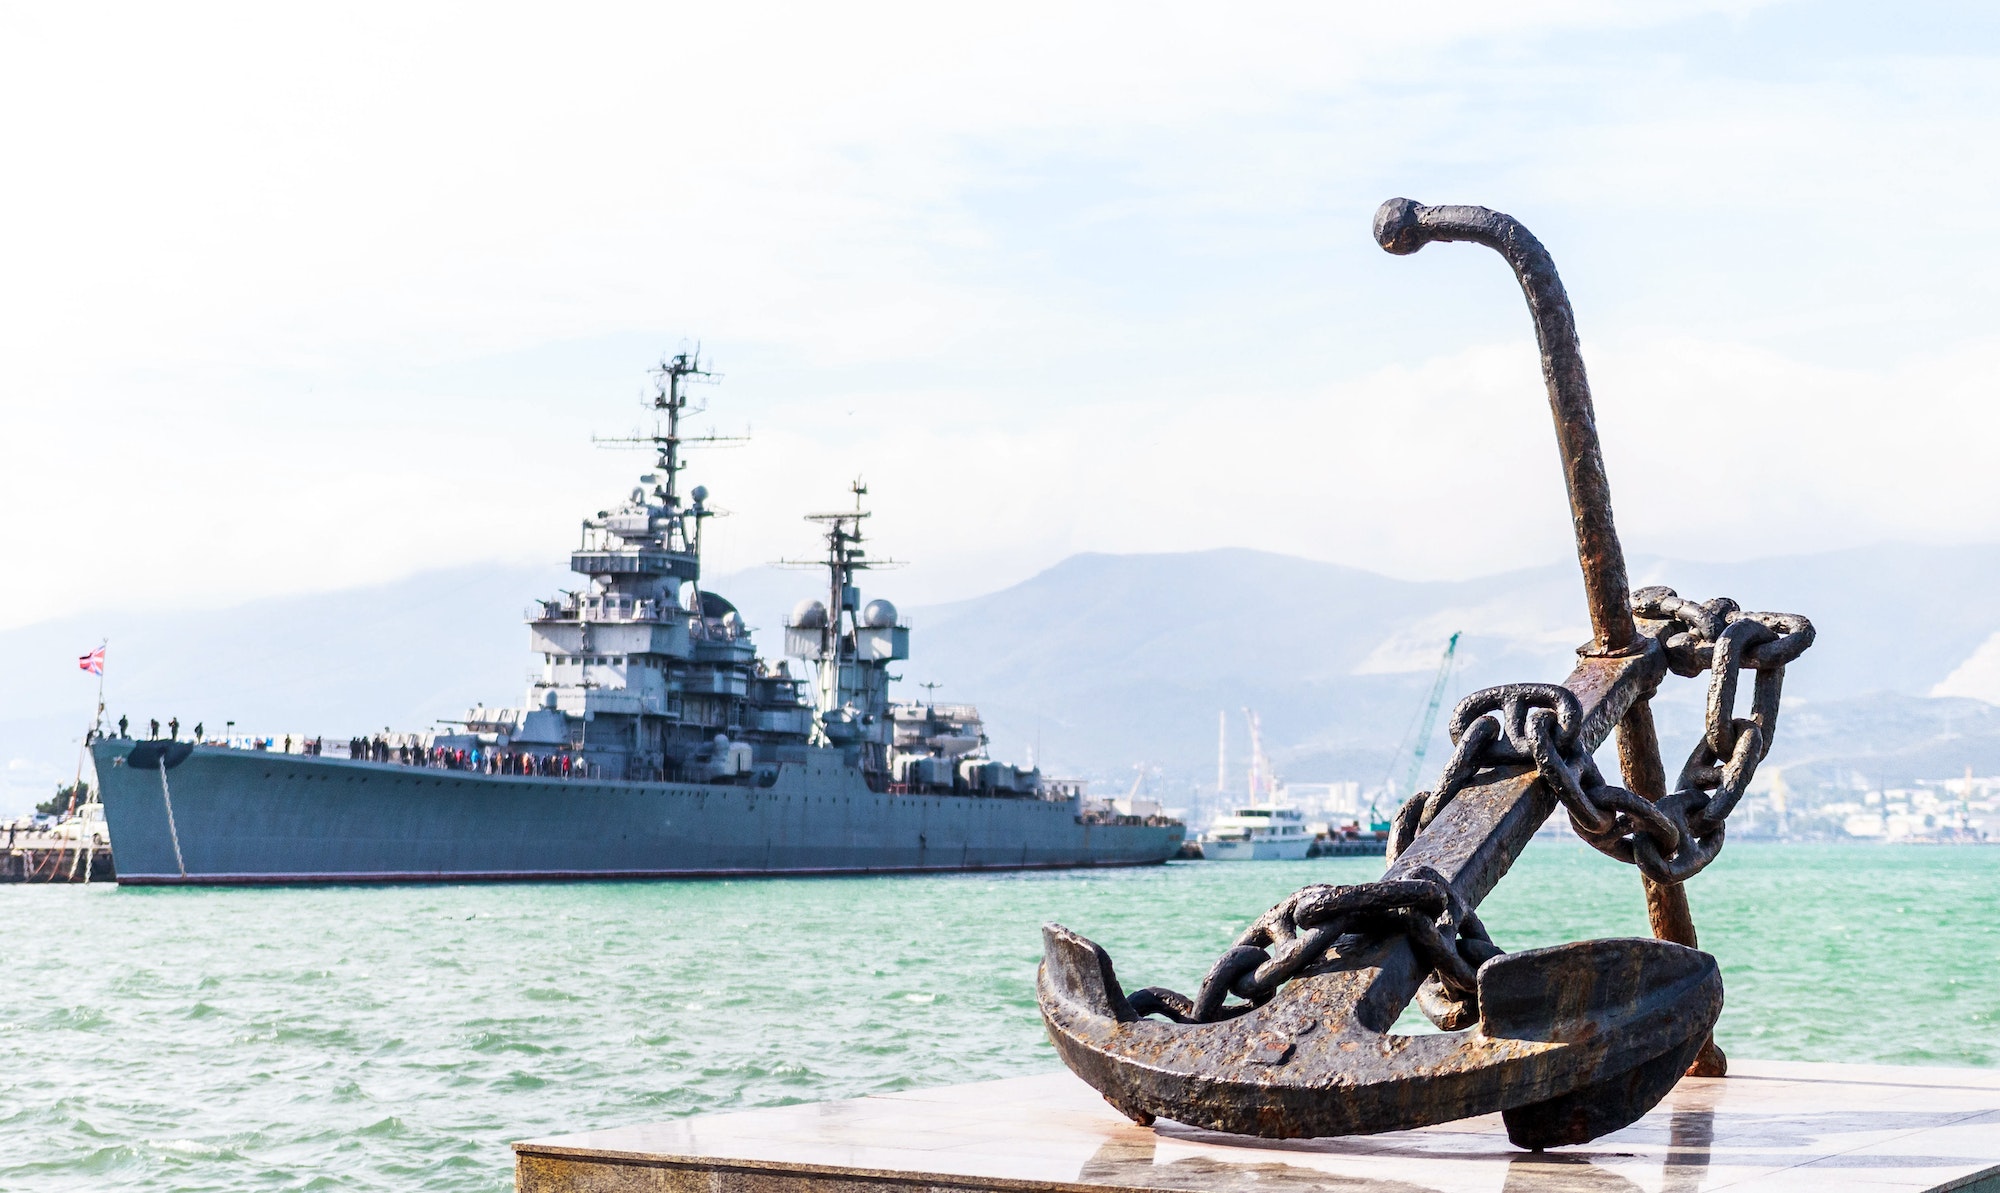 Anchor on the background of a warship in the port